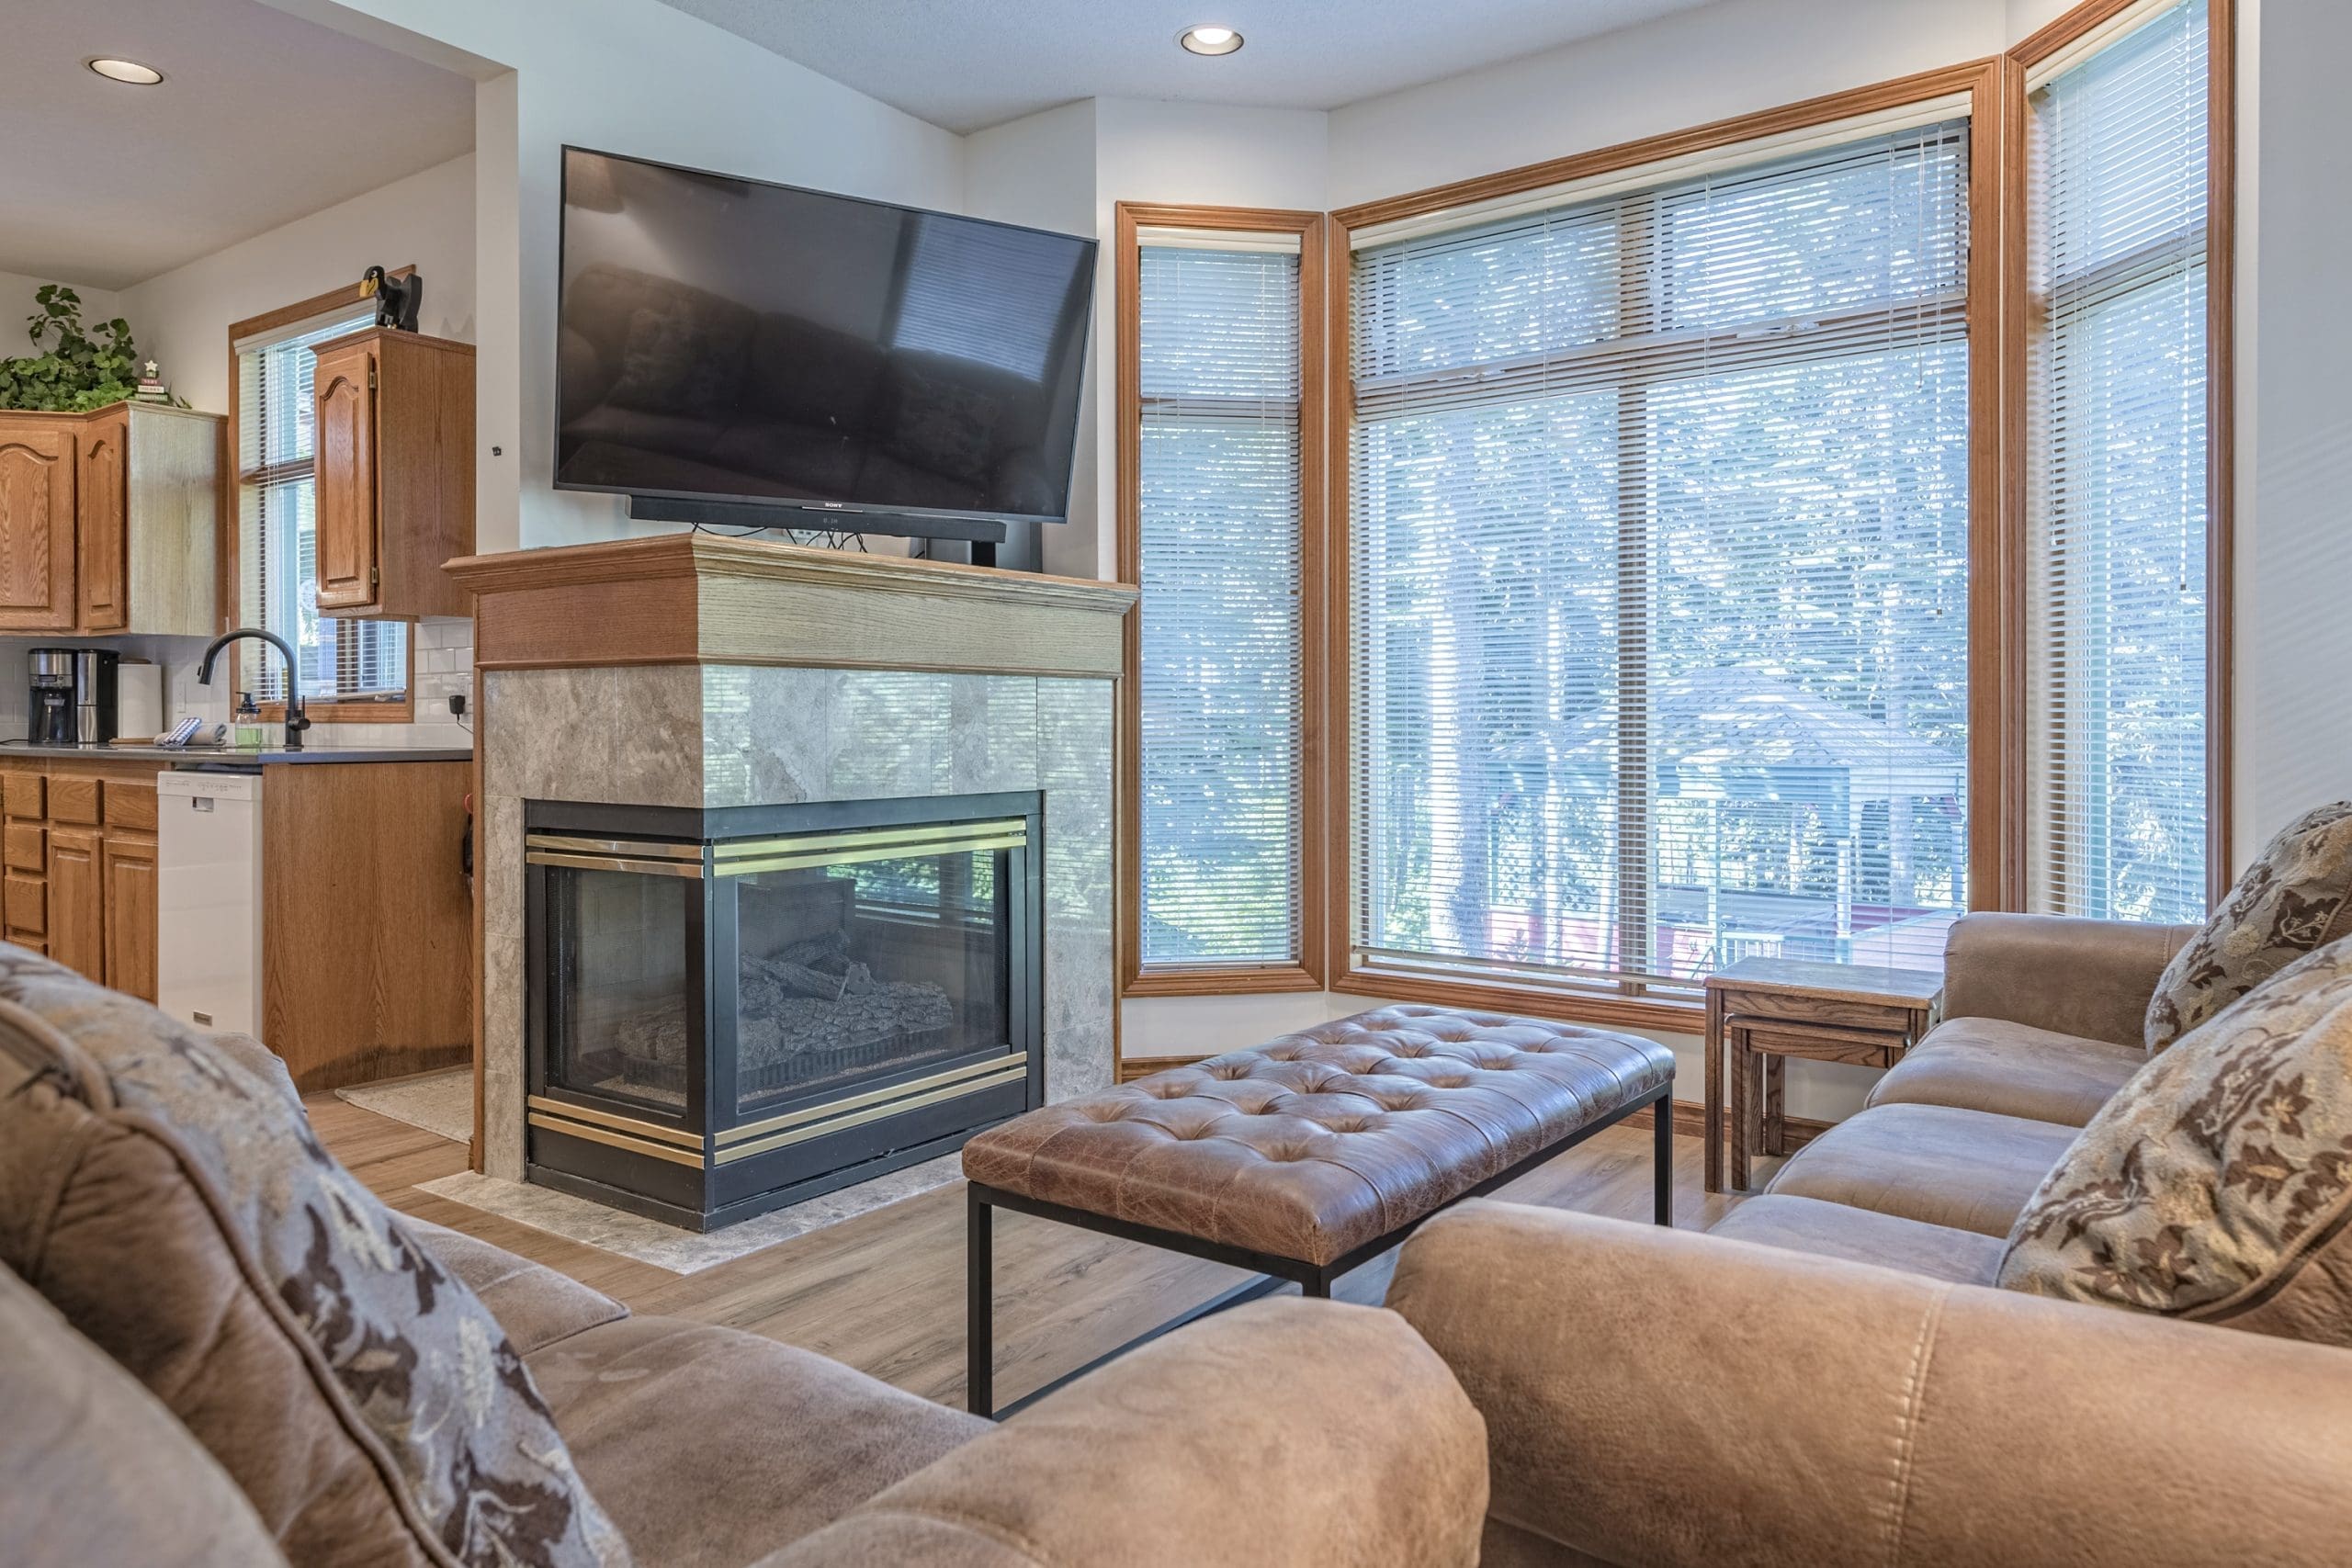 Living room with bright open windows and great views of the skating pond, gas fireplace, TV, dining area in this cozy suite. Features a garage for storage, great access to the adventure park and close to the village. It's pet-friendly too!